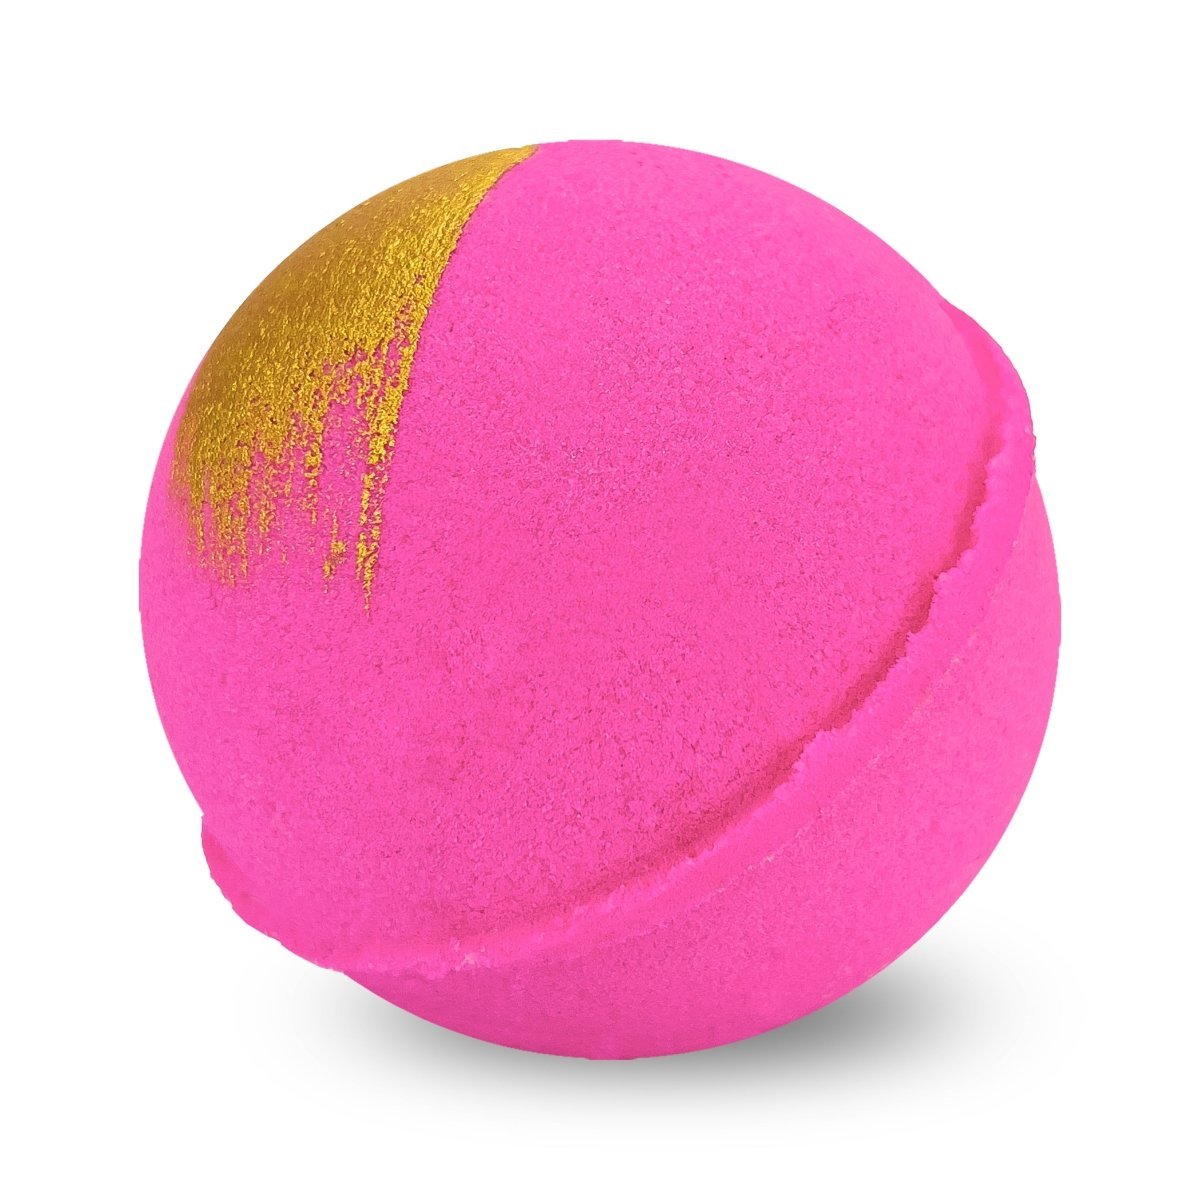 Secret Rose Bath Bomb for Kids & Adults - Large Colourful Glitters & Musk Rose Fragrance - Made in Australia by Bath Box